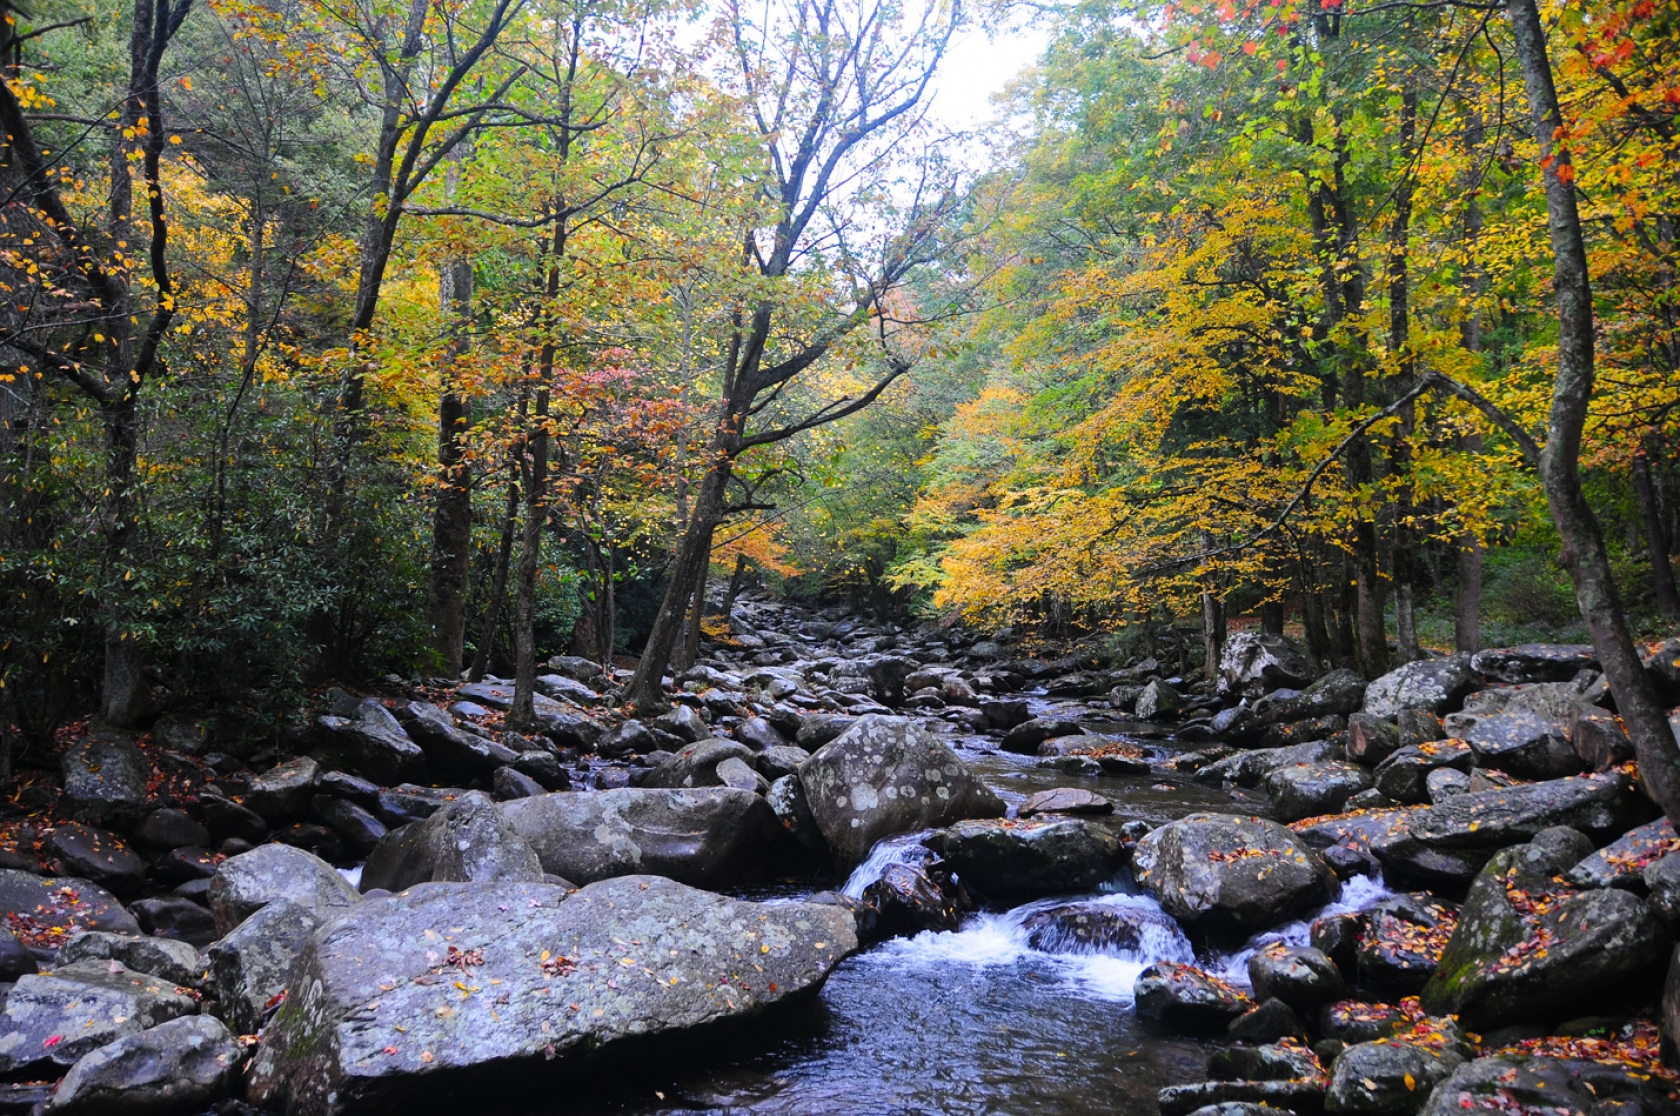 Trees with yellow leaves line a small, boulder-filled river